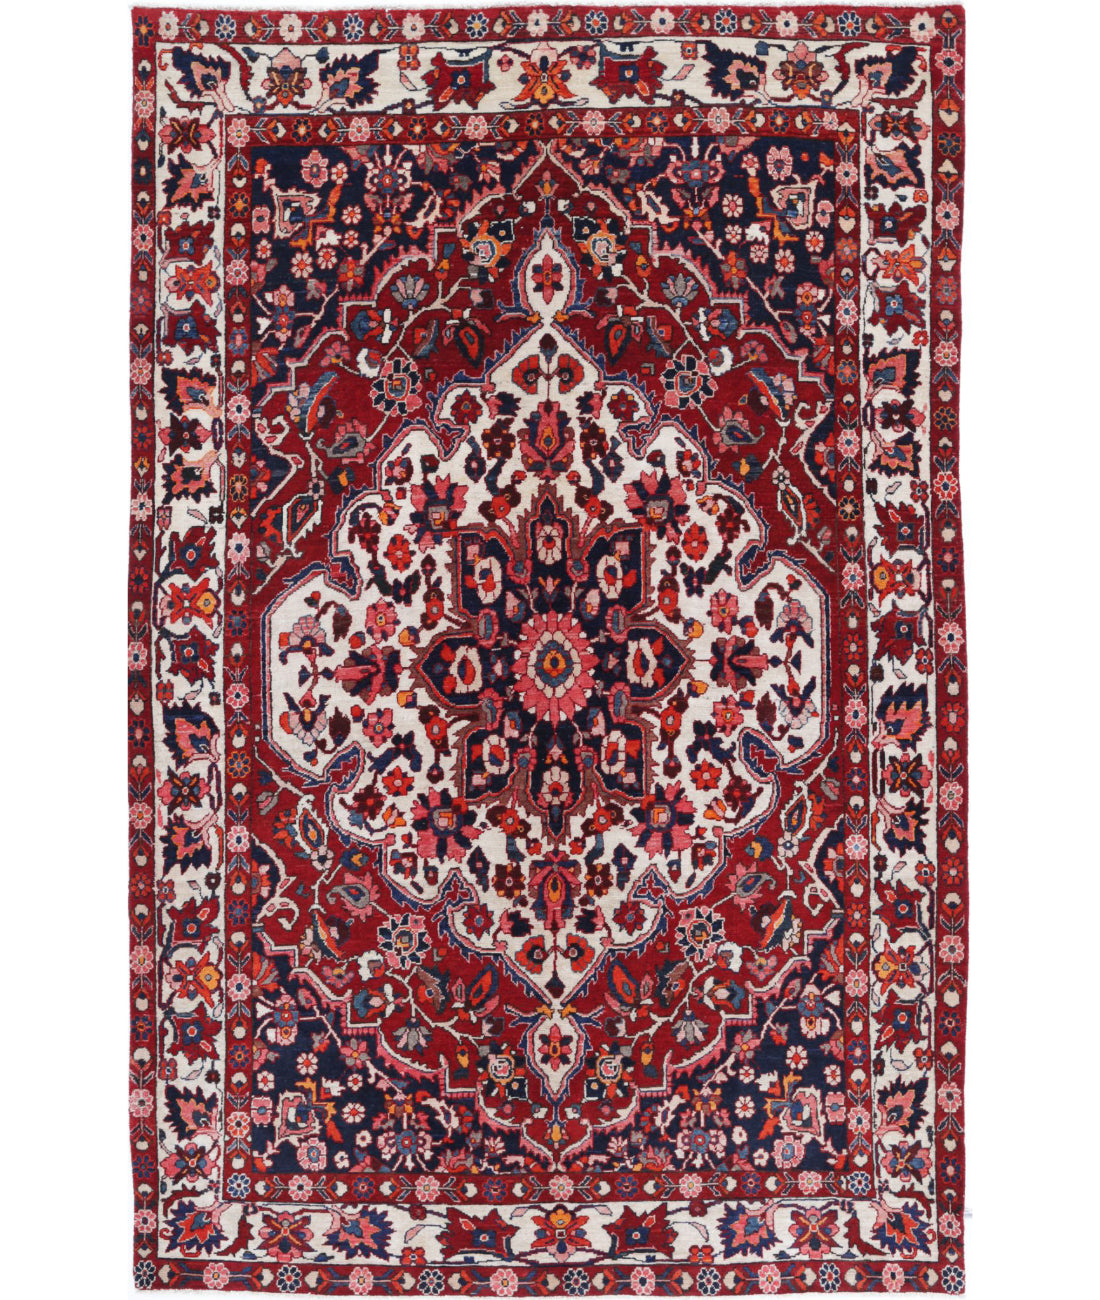 Hand Knotted Fine Serenity Wool Rug - 6'1'' x 8'4'' 6'1'' x 8'4'' (183 X 250) / Brown / Blue